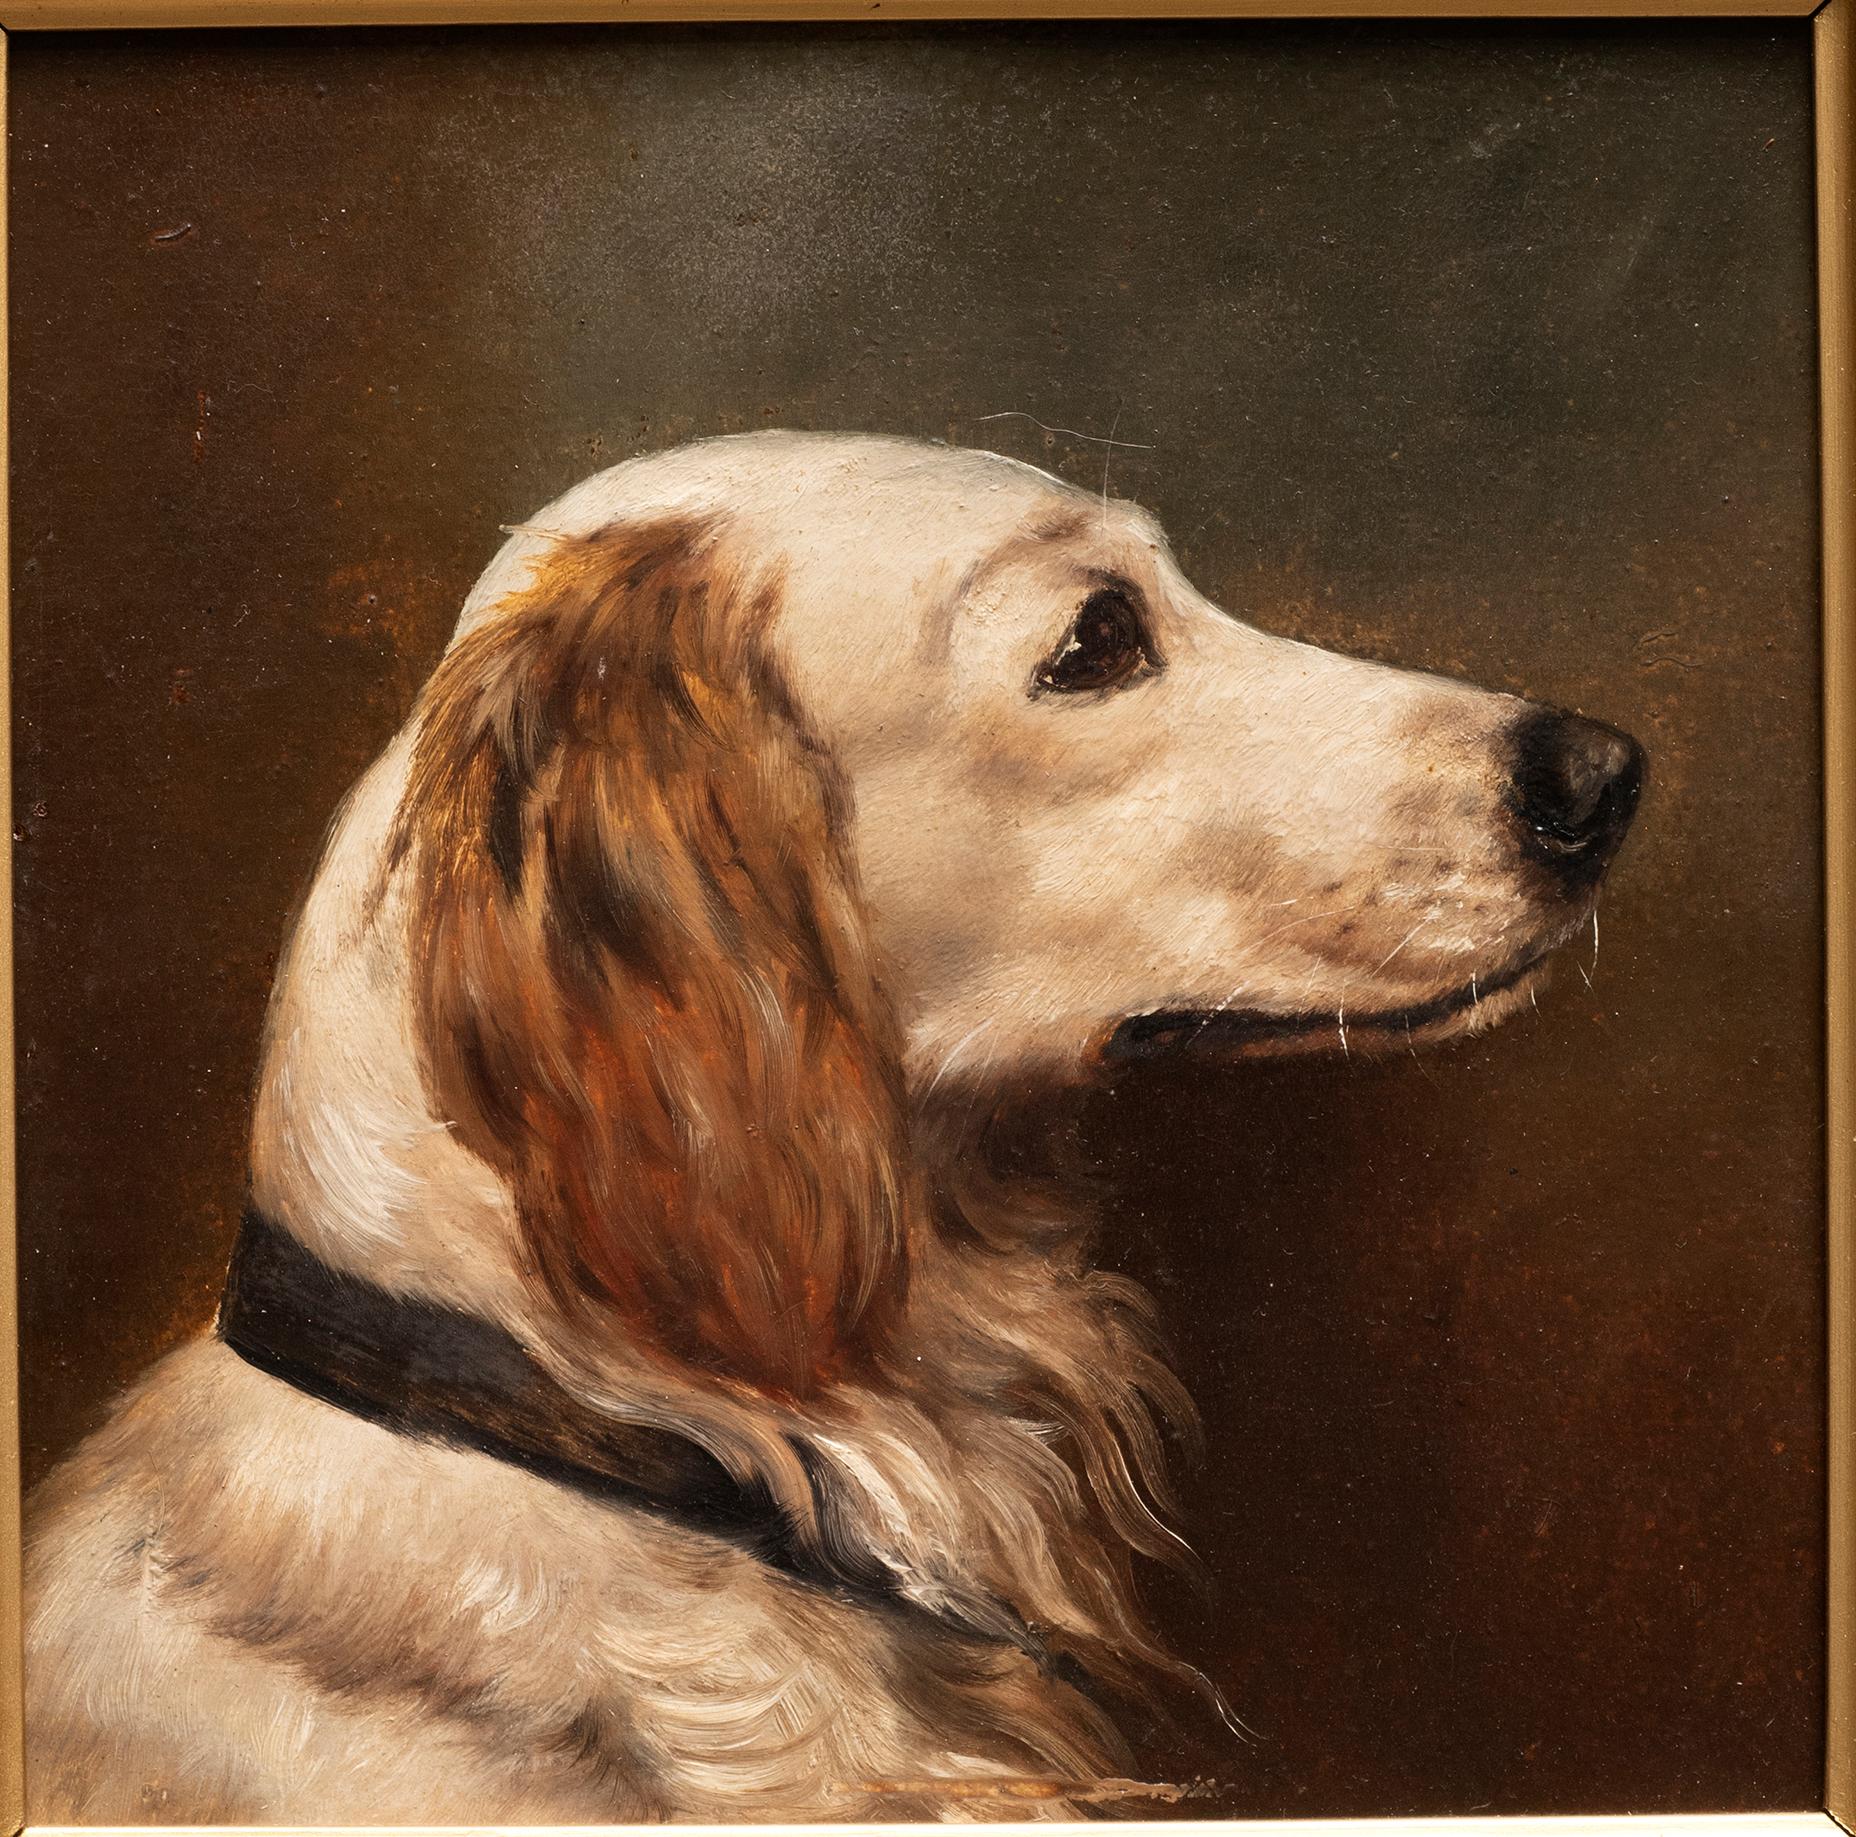 Dog Portrait of a Golden Retriever Circa 1900 - Painting by Unknown